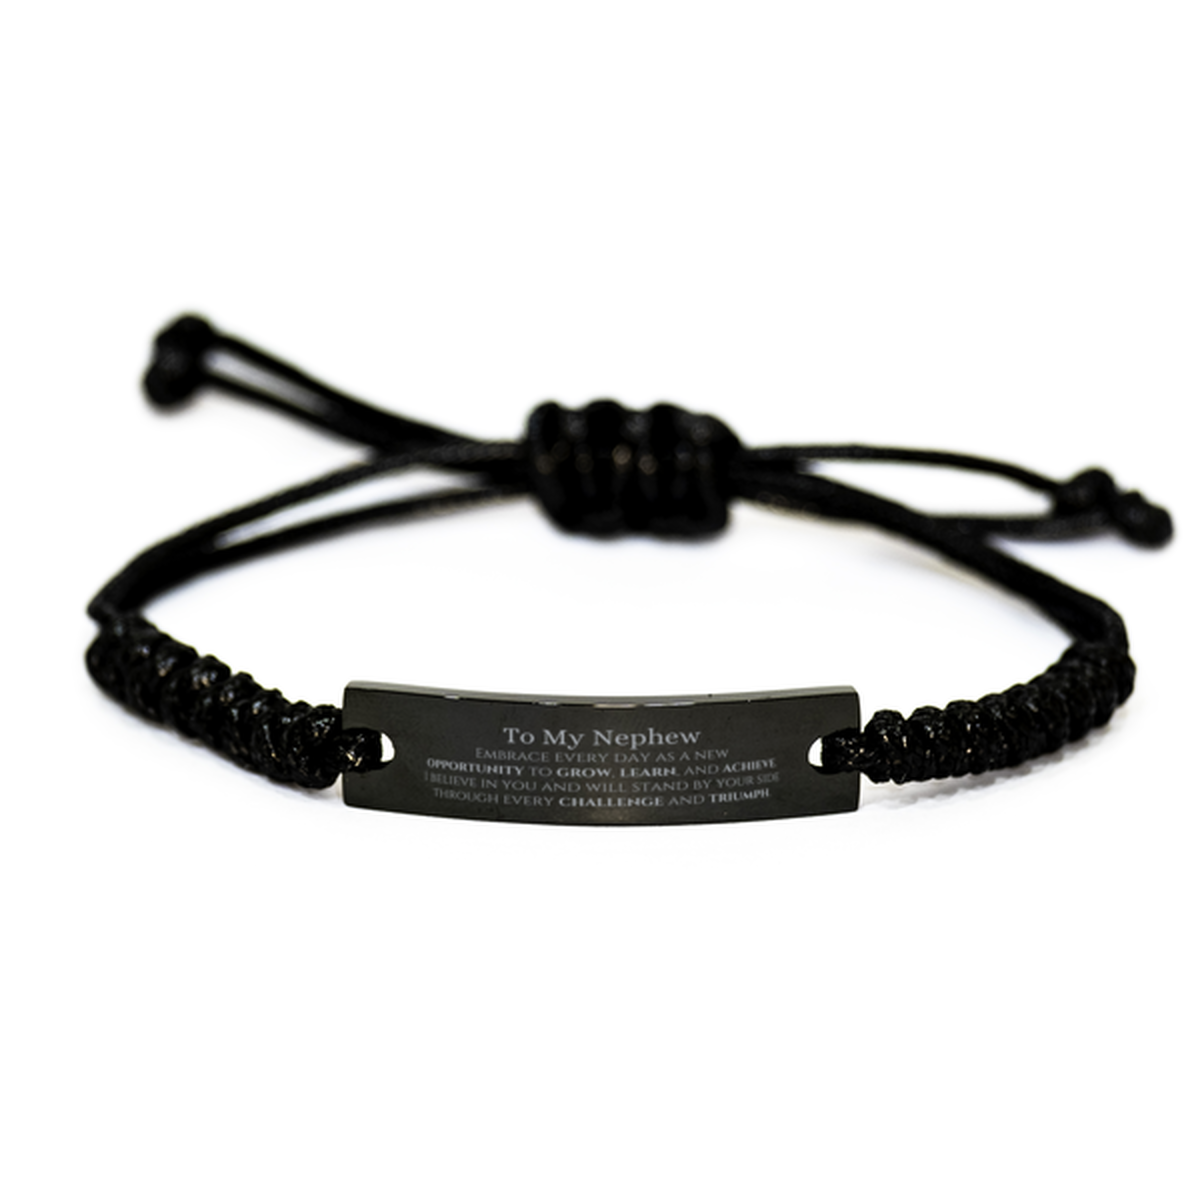 To My Nephew Gifts, I believe in you and will stand by your side, Inspirational Black Rope Bracelet For Nephew, Birthday Christmas Motivational Nephew Gifts